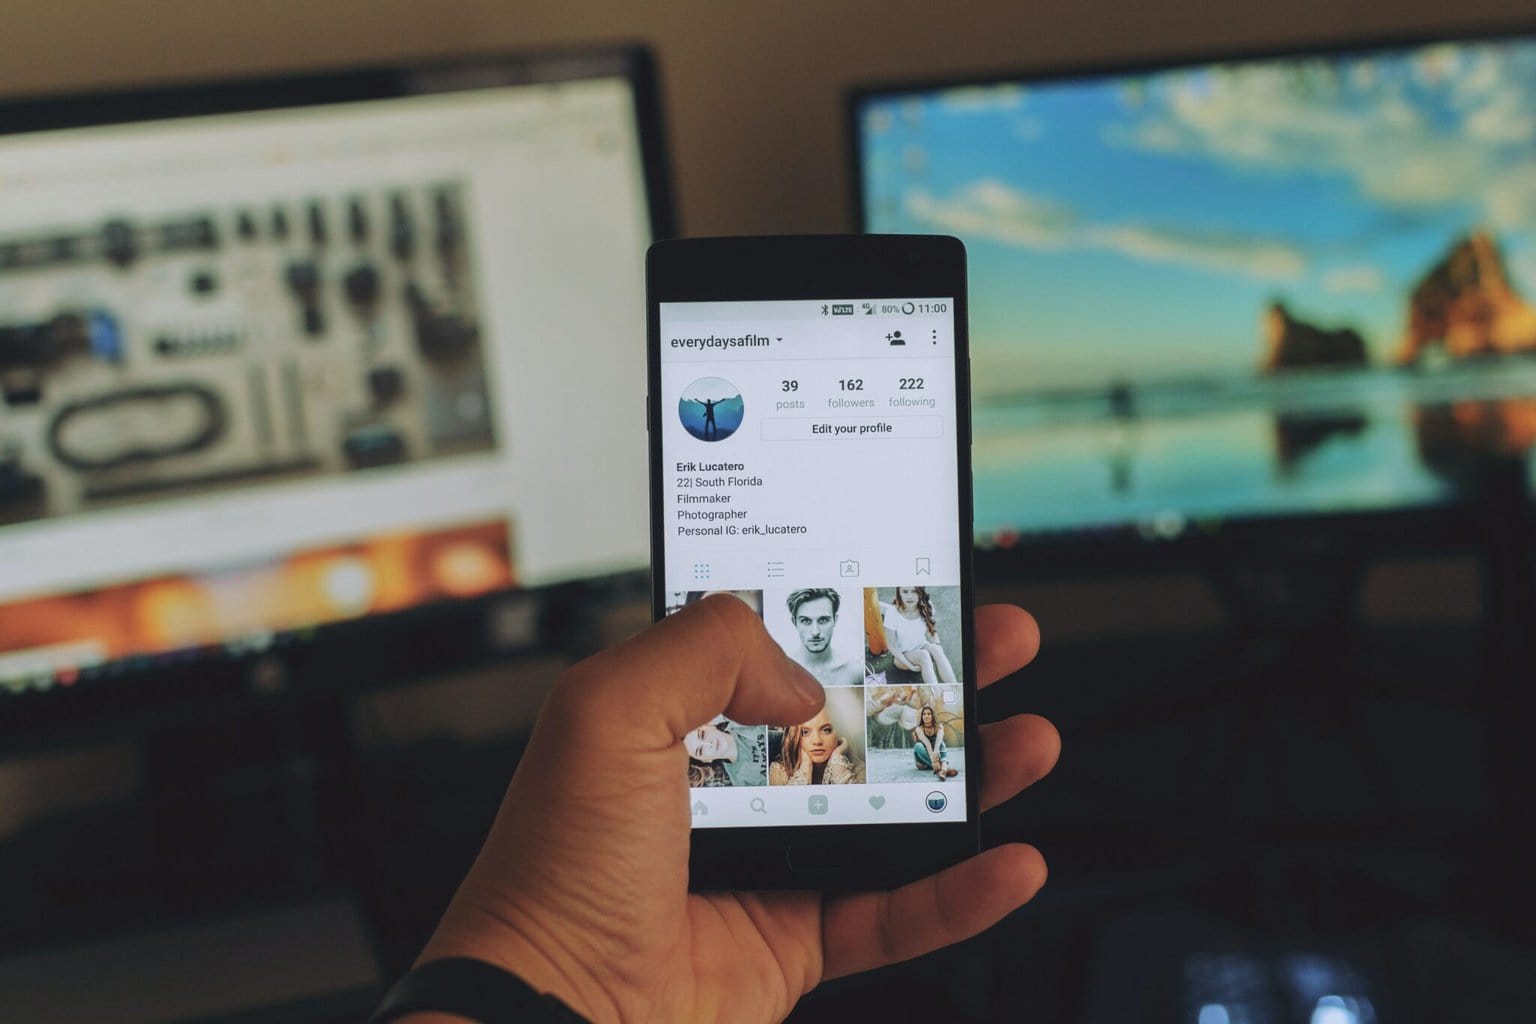 DID YOU KNOW THIS TRICK TO DOWNLOAD AN INSTAGRAM IMAGE?